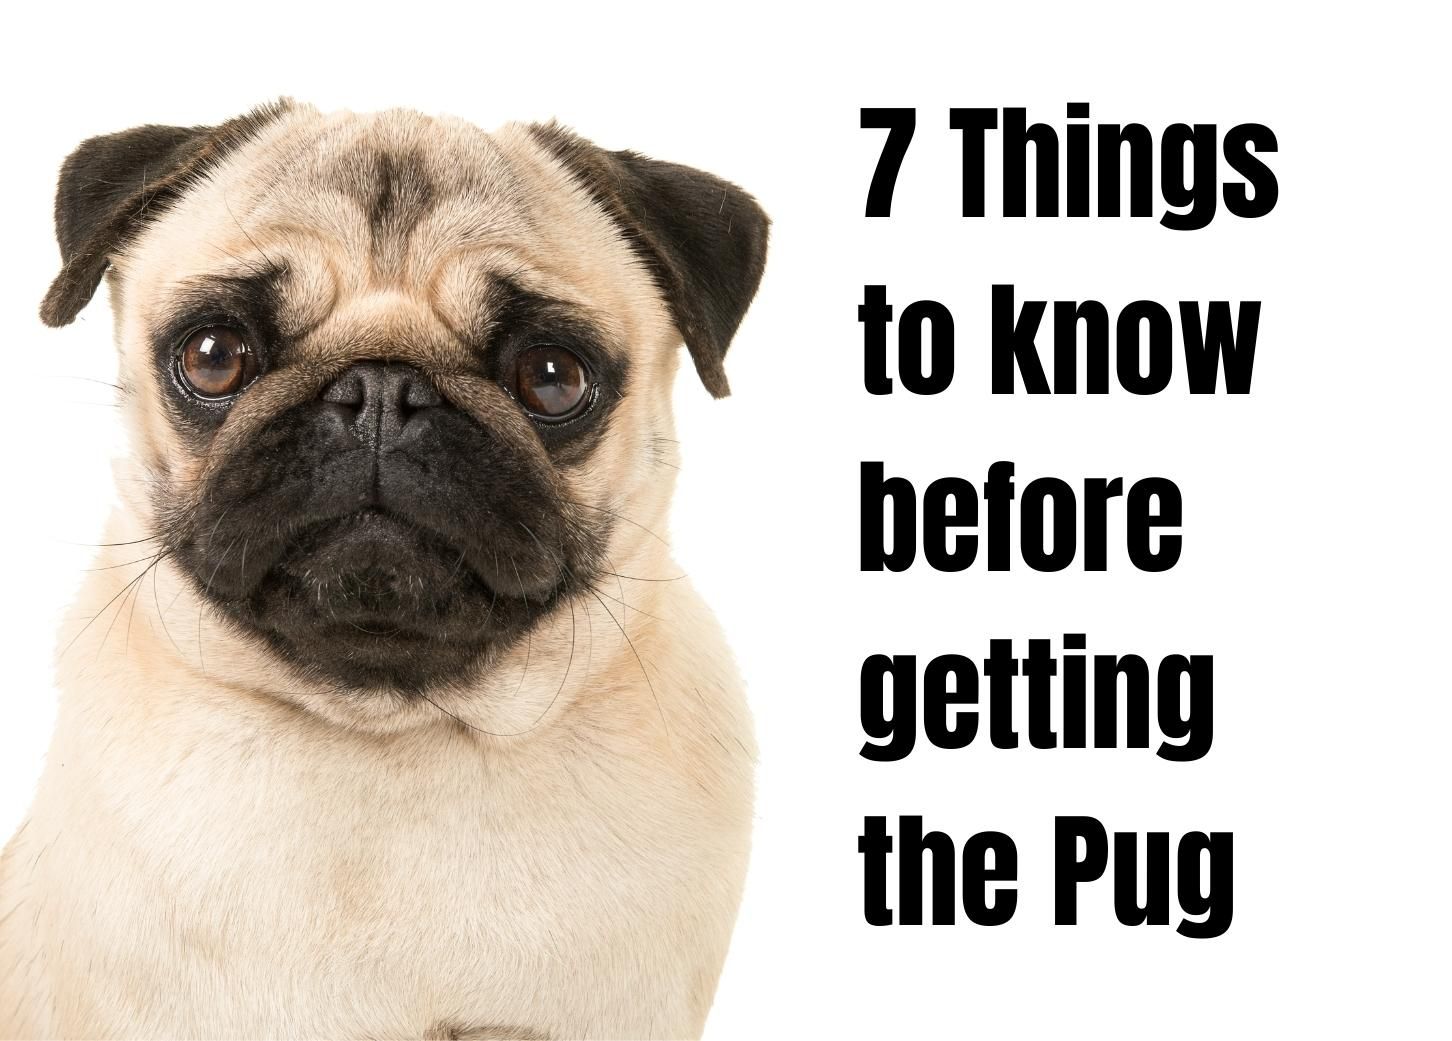 7 Fascinating Things to Know About the Pug